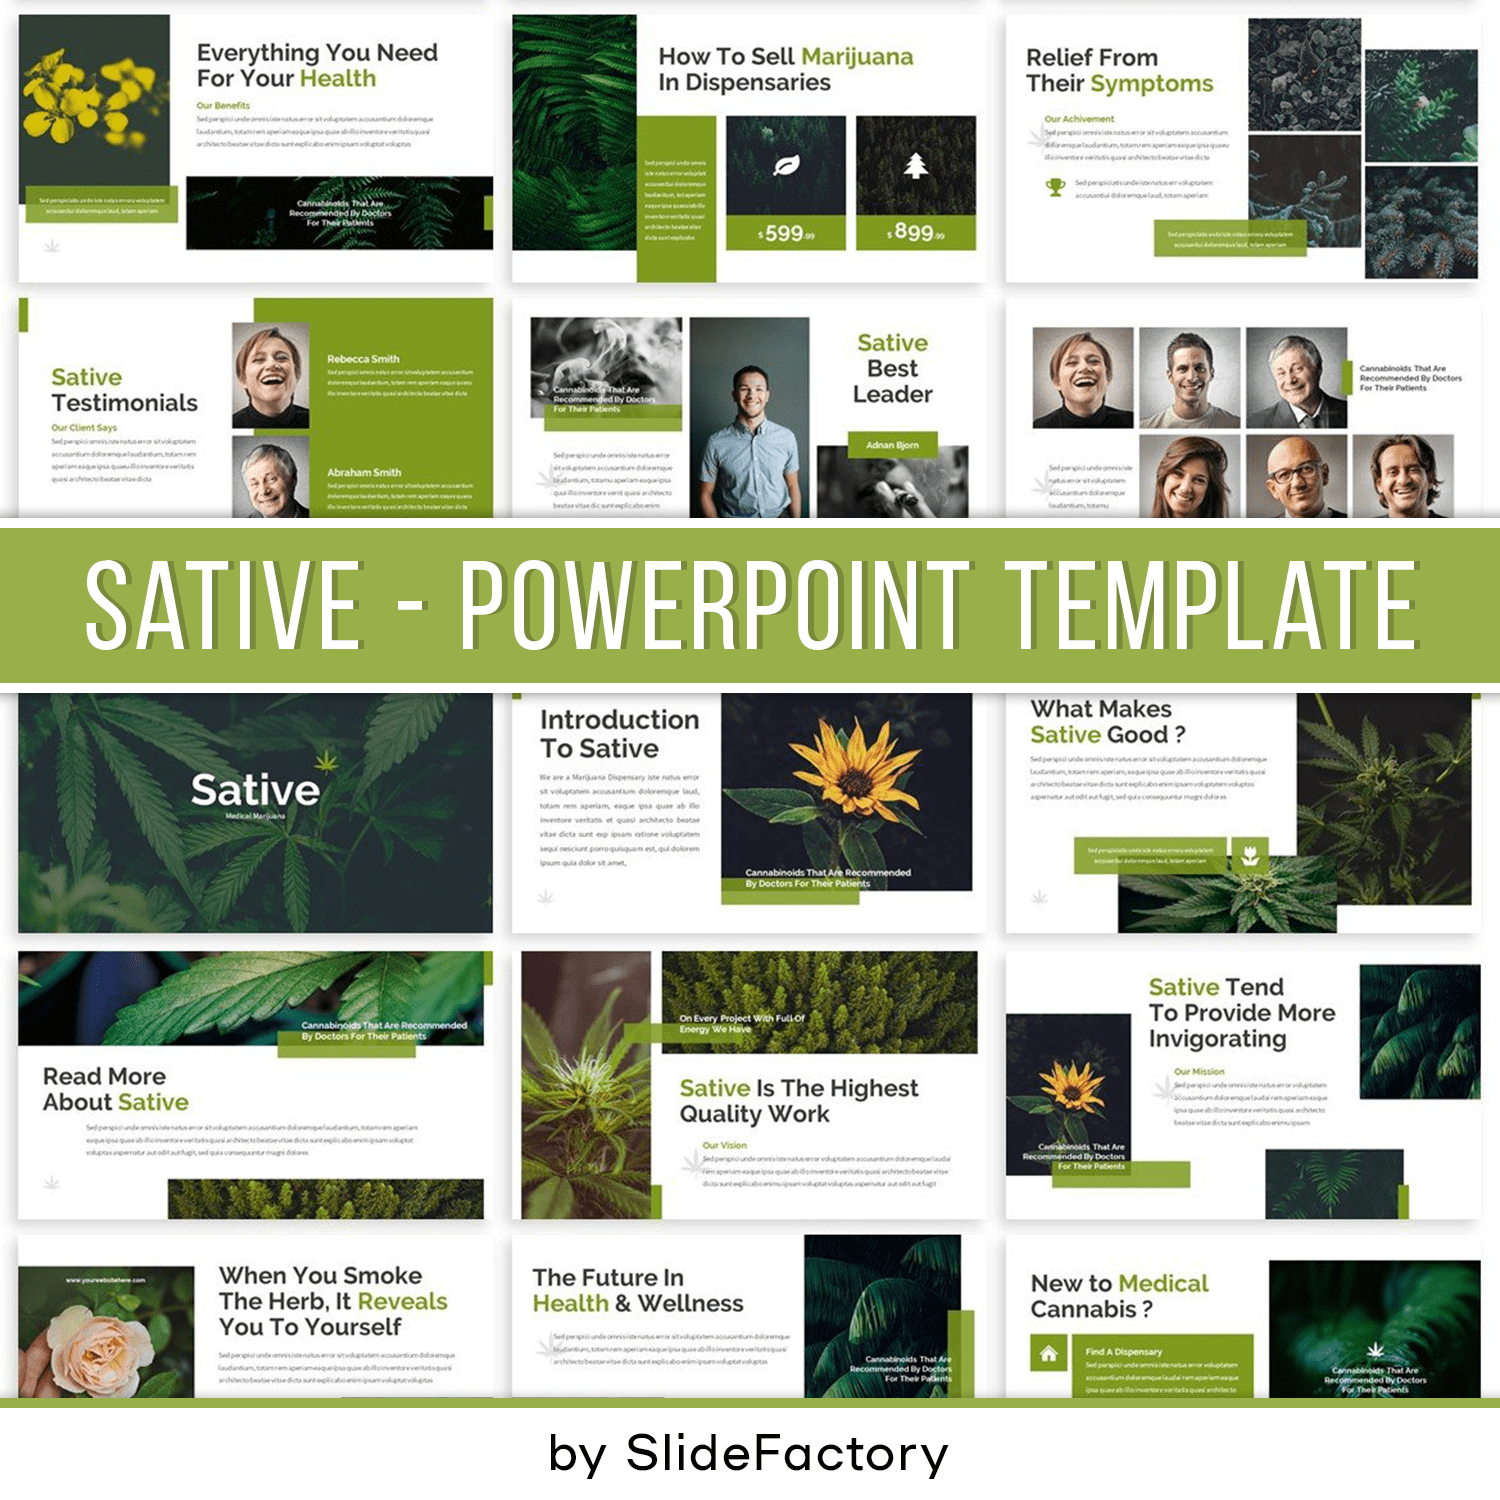 Sative - Powerpoint Template.